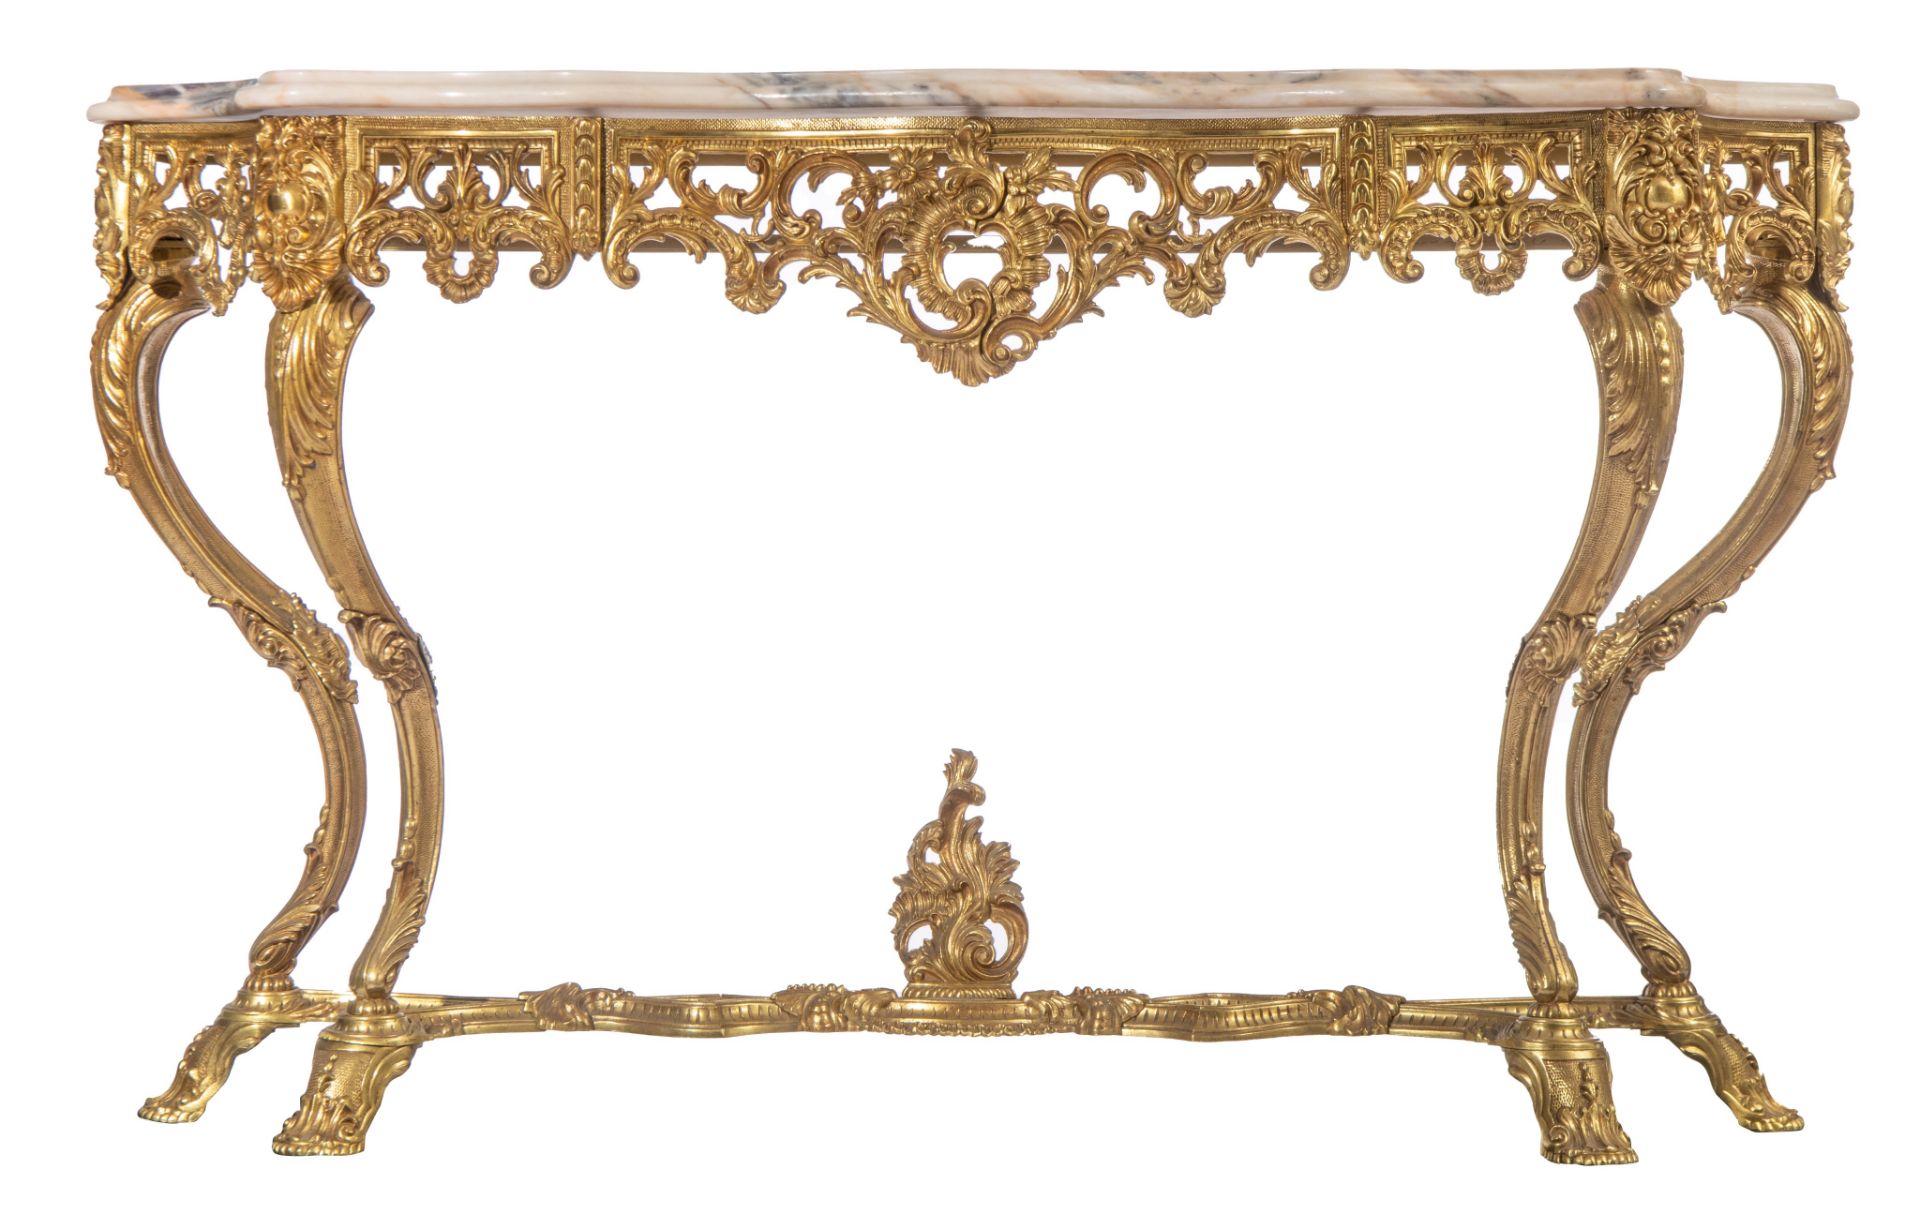 A large Rococo style gilt metal console table and mirror, H 125 - W 110 cm (the mirror) - H 85 - W 1 - Image 3 of 12